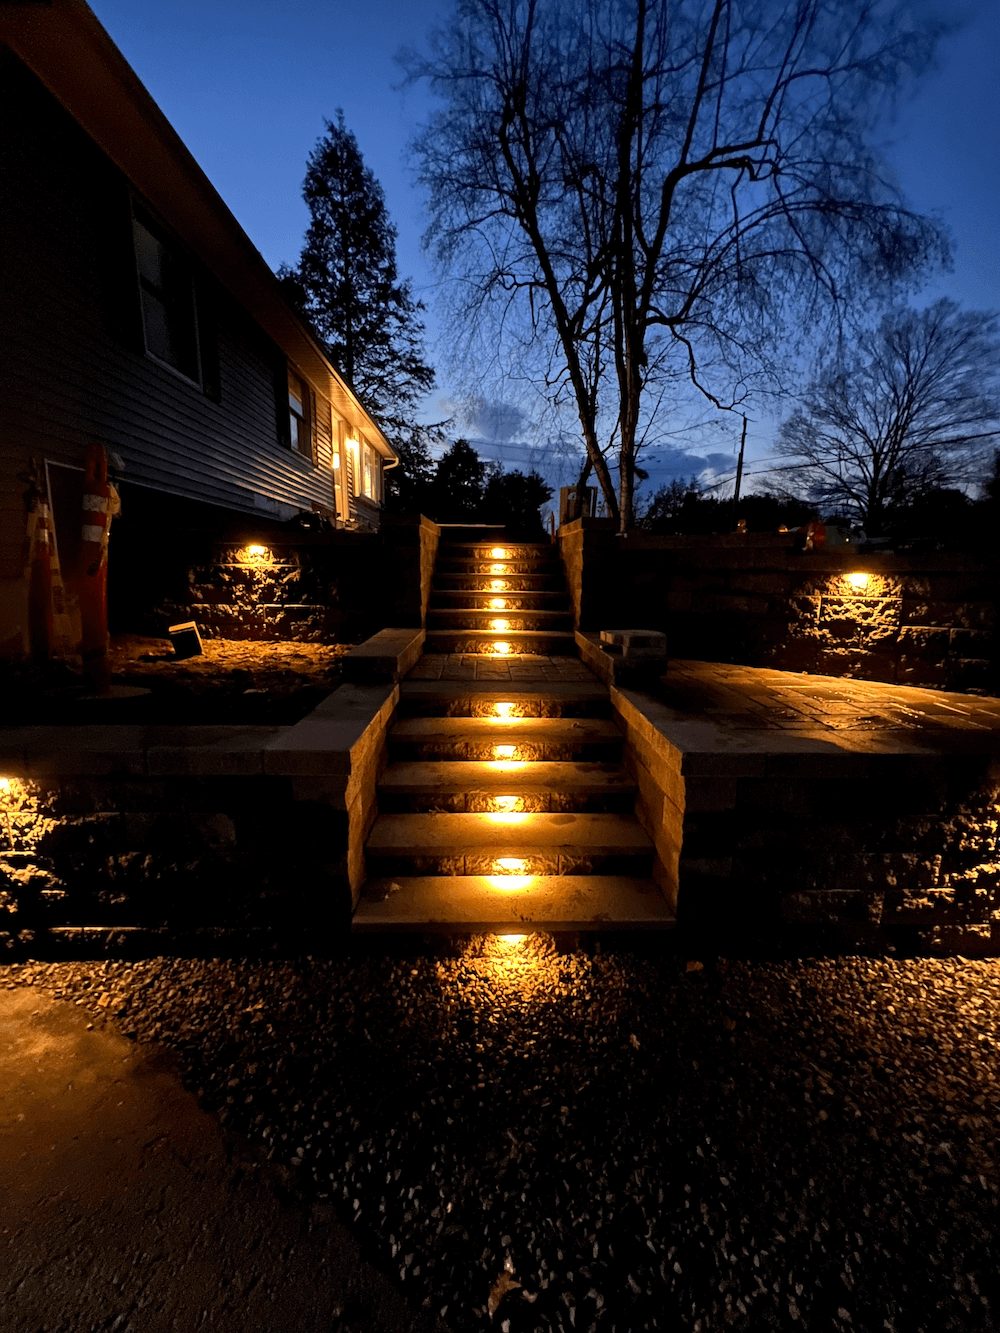 Block stairs with lighting. Night time 